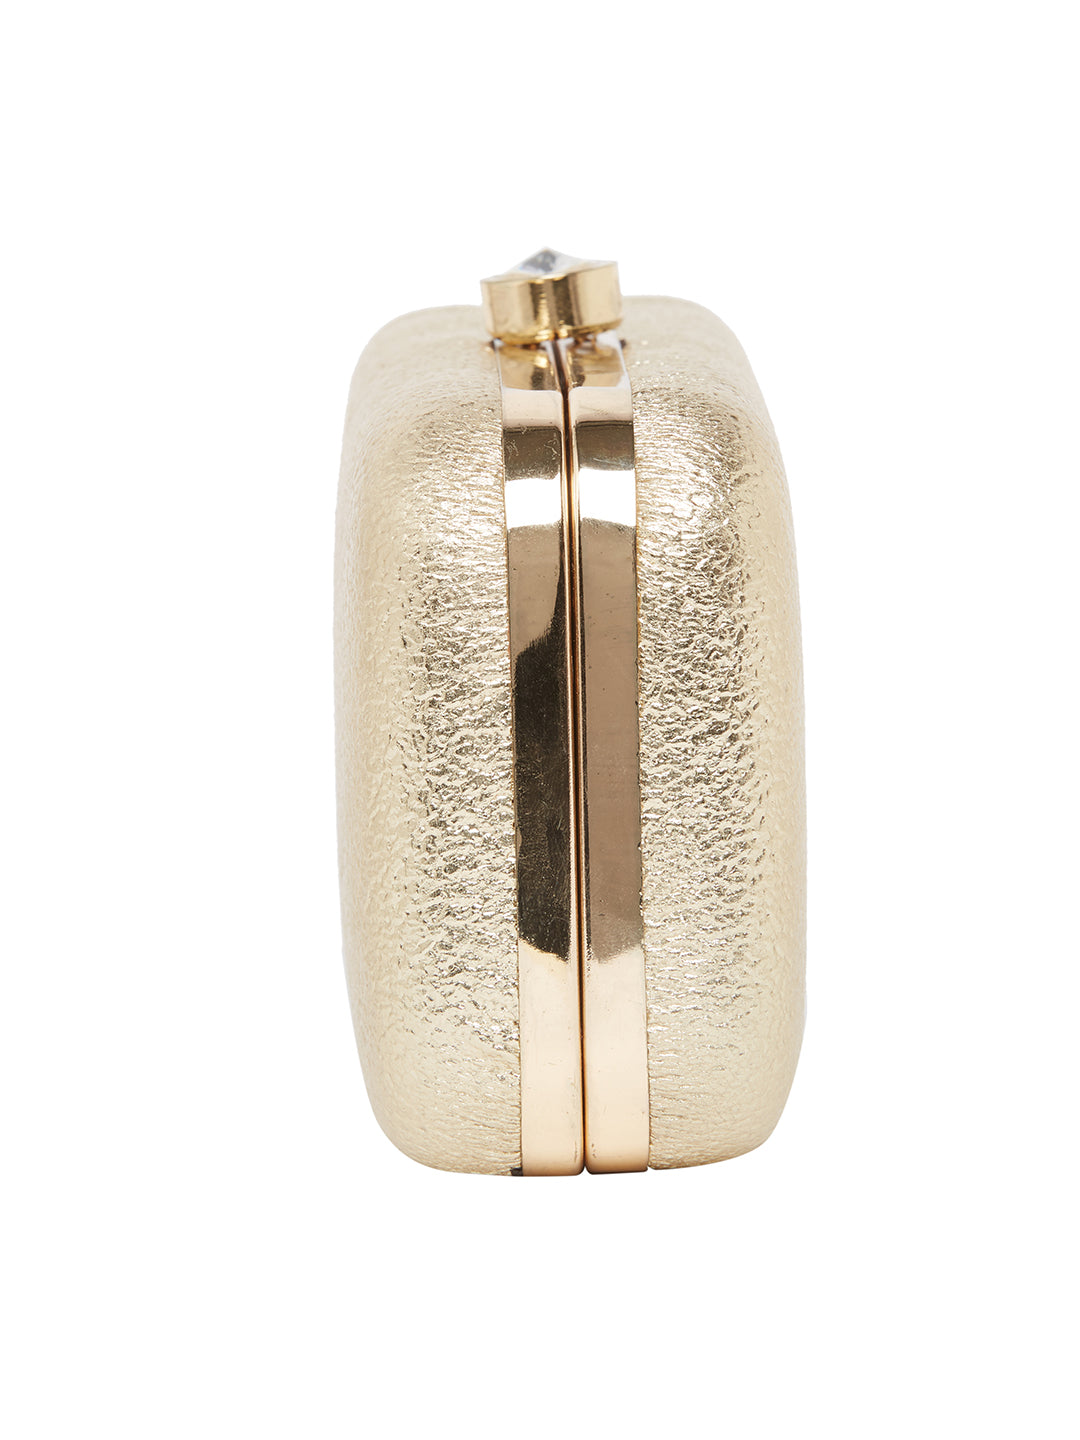 A Vdesi Base gold clutch bag with a metal chain on a white background.